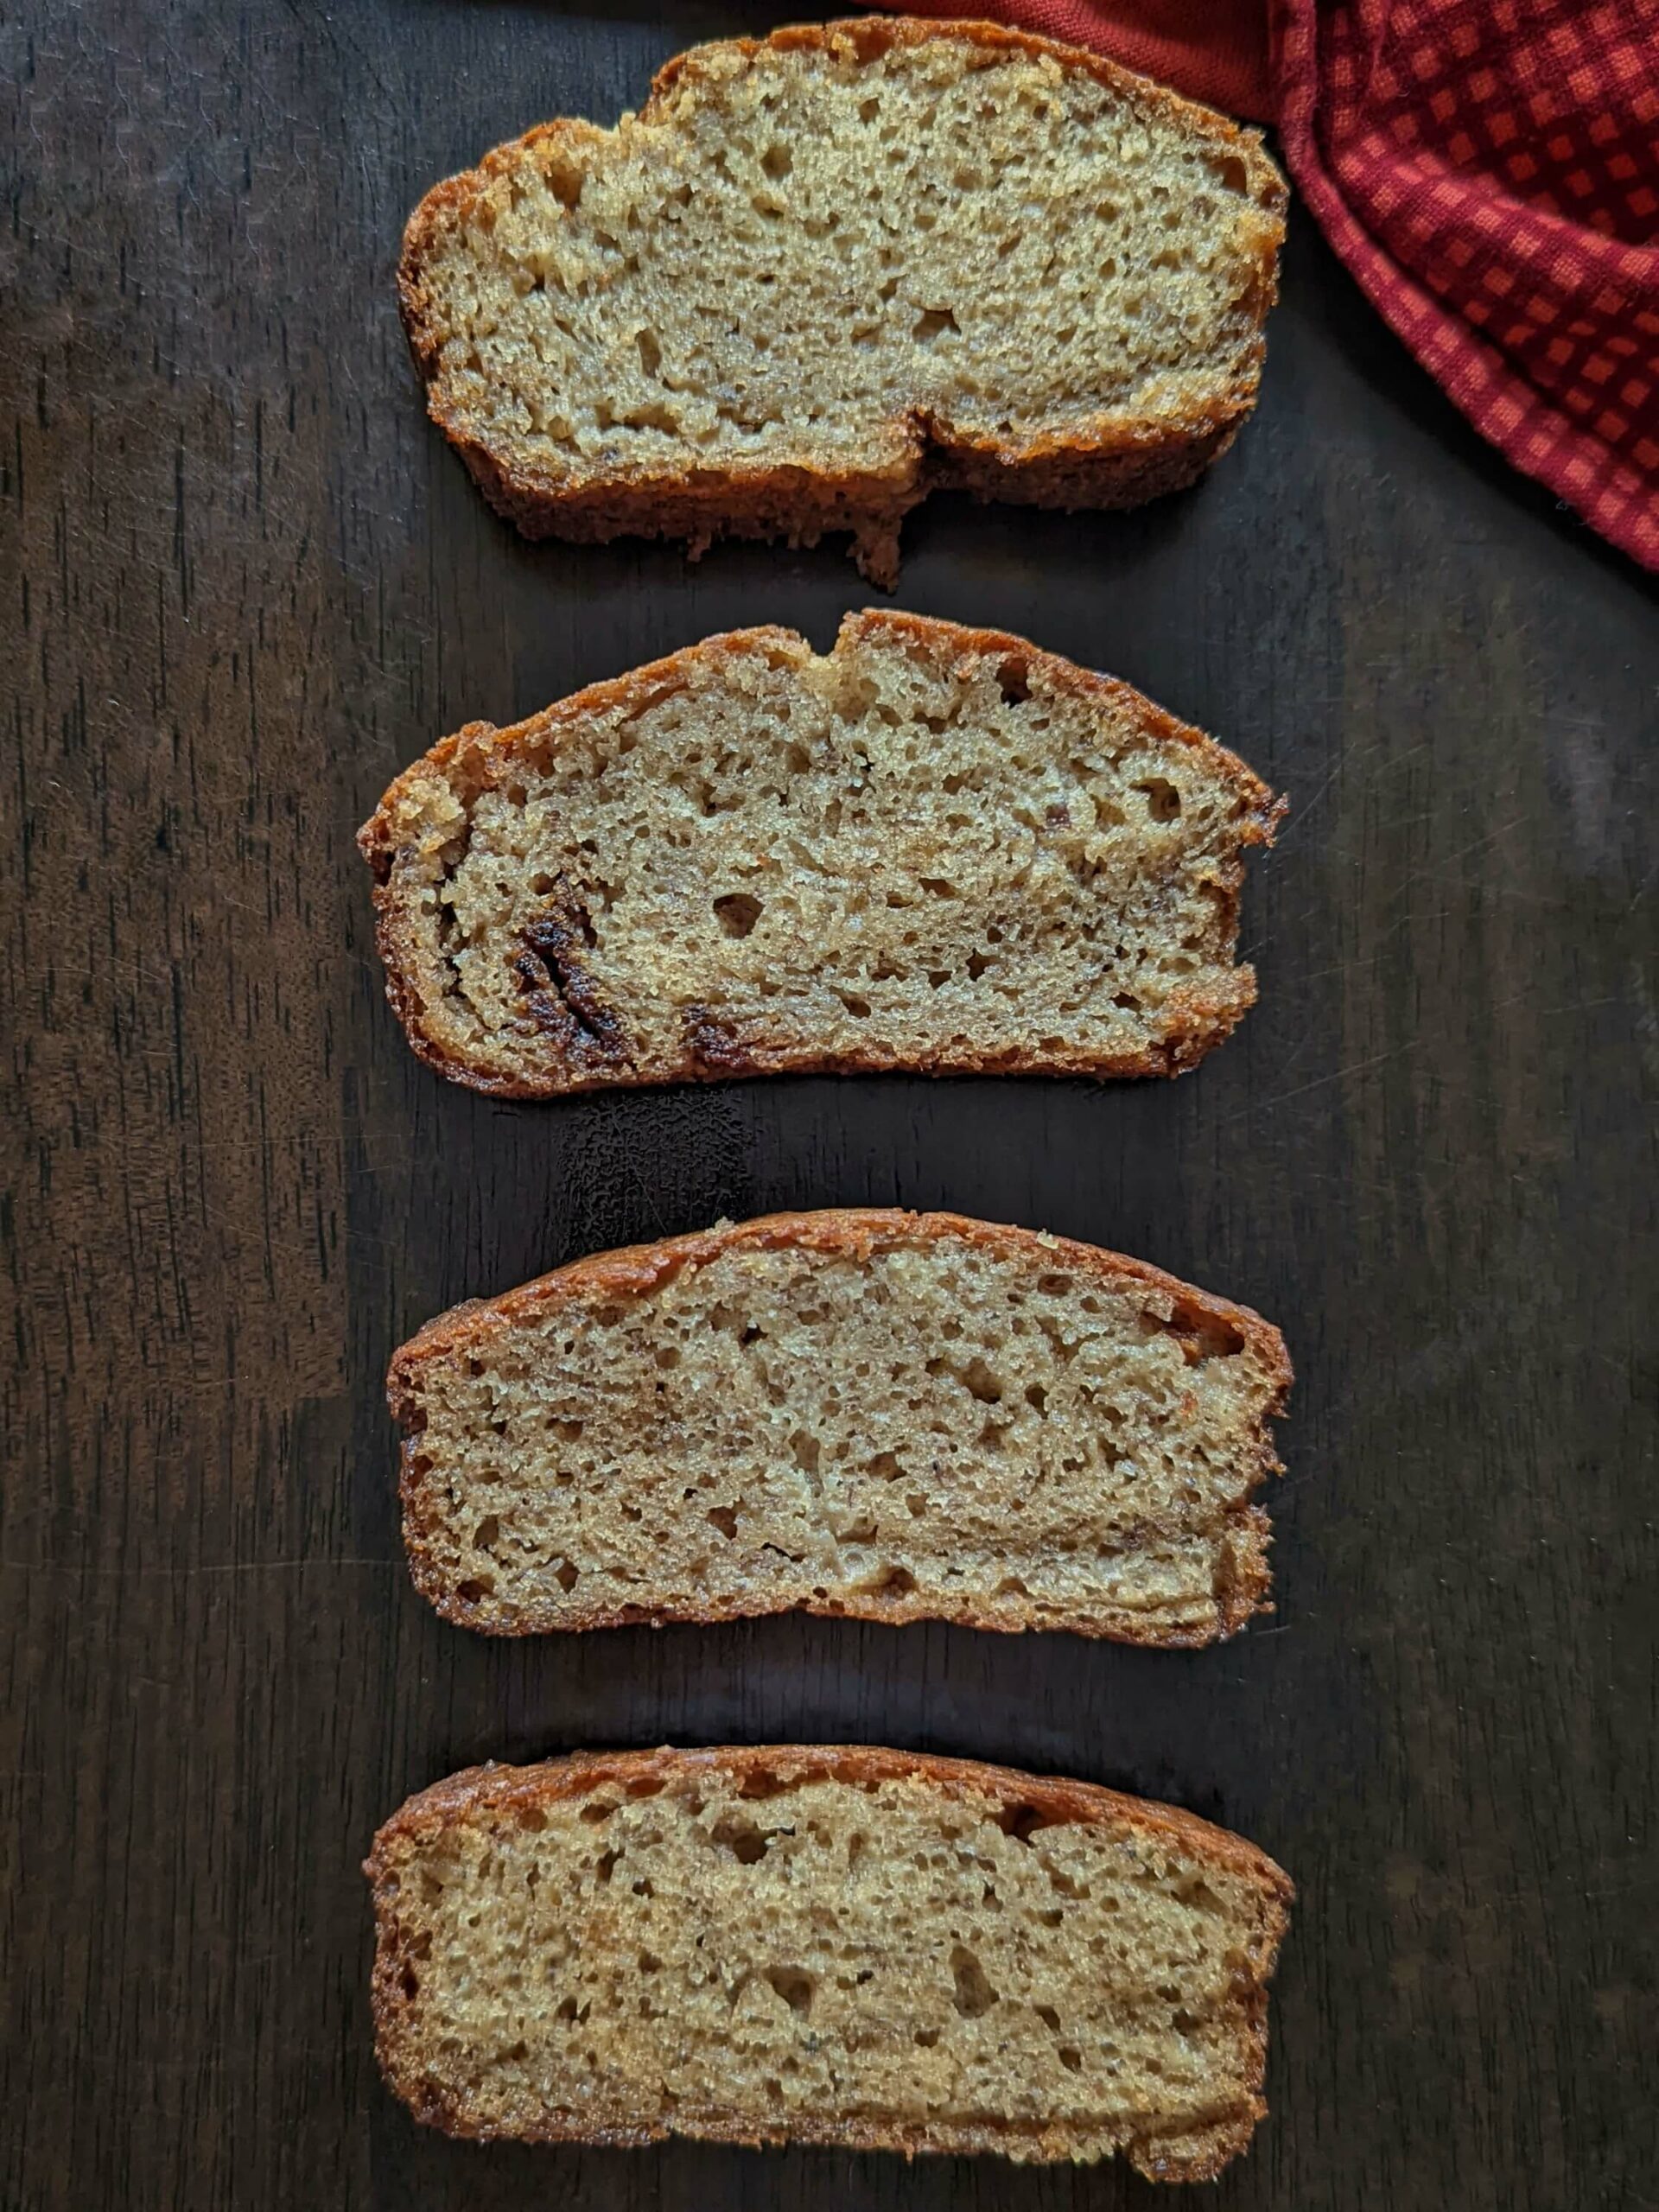 Slices of banana bread lined up on a table.